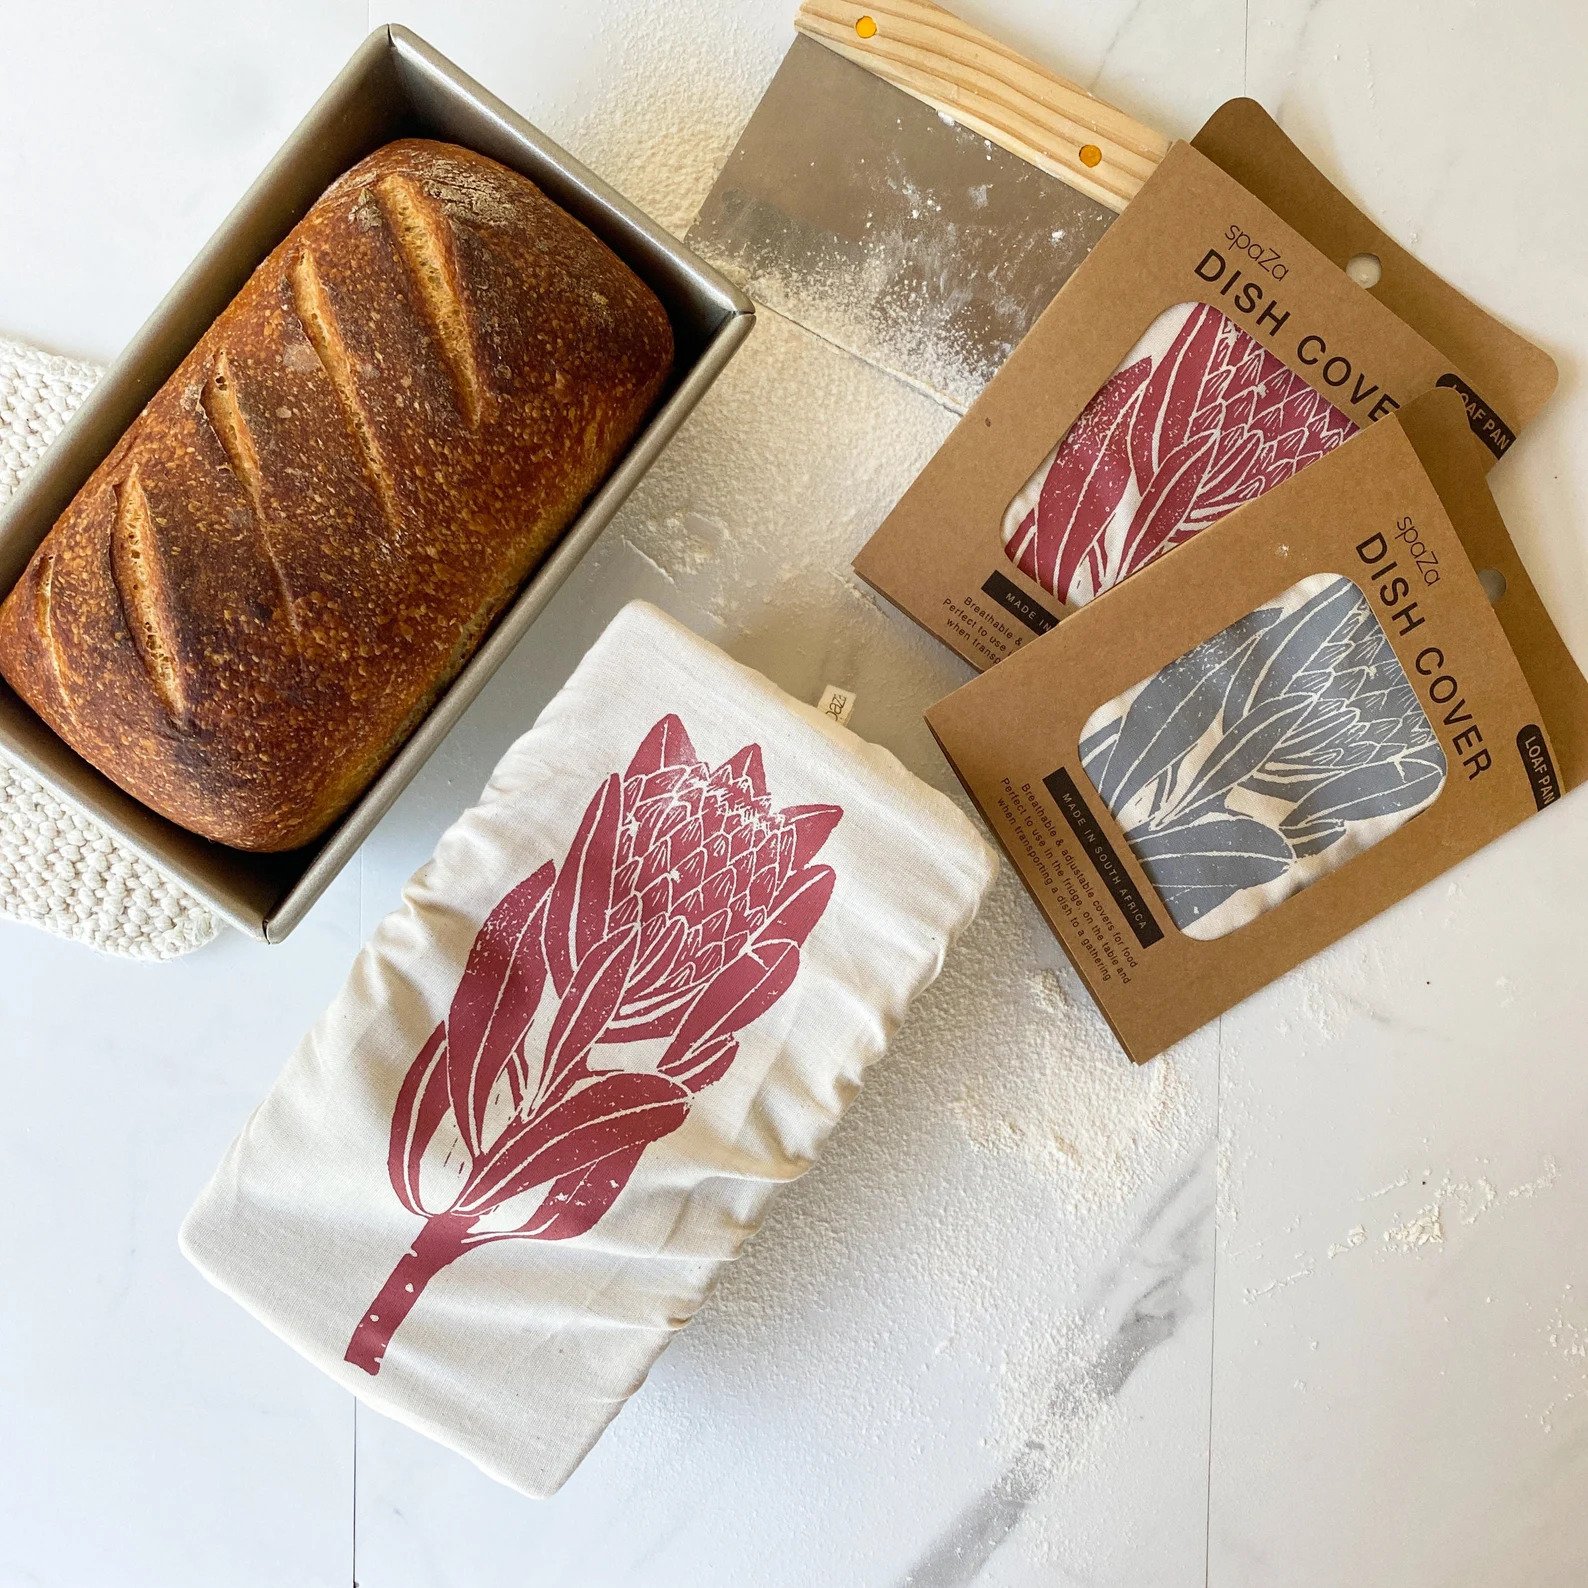 The Best Bread-Themed Gifts and Items